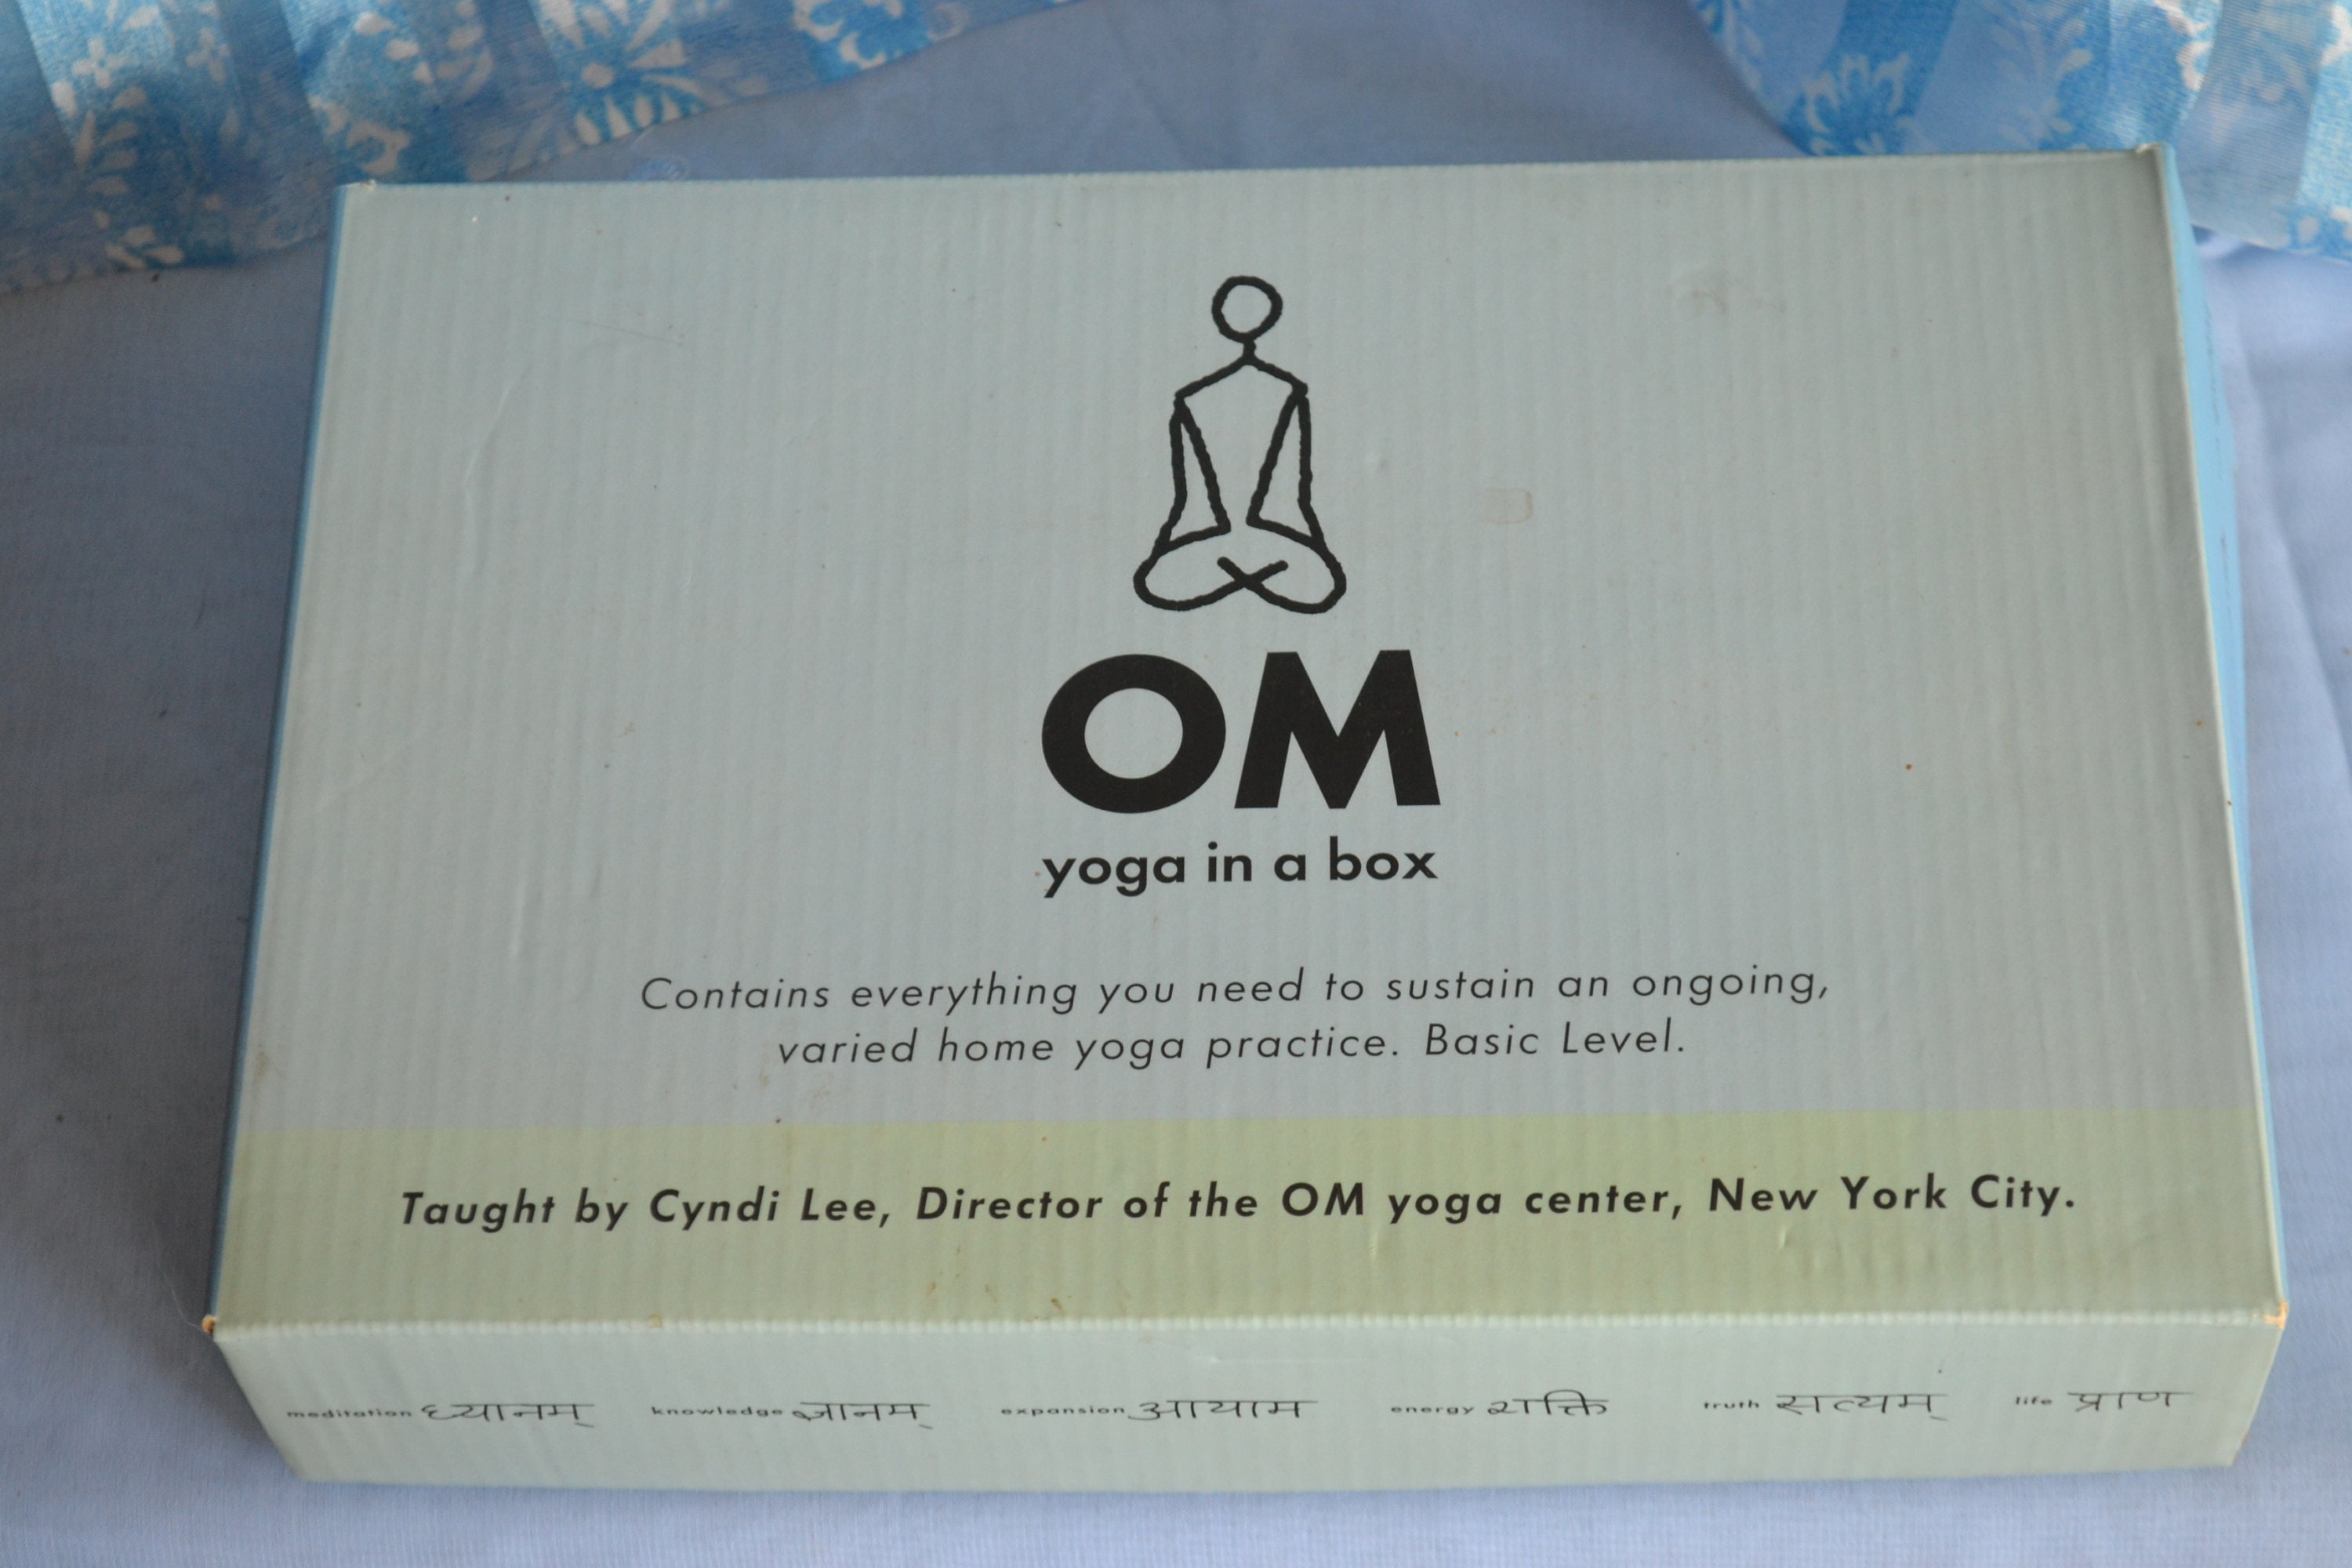 OM Yoga in a Box. All You Need to Sustain an Ongoing, Varied Yoga